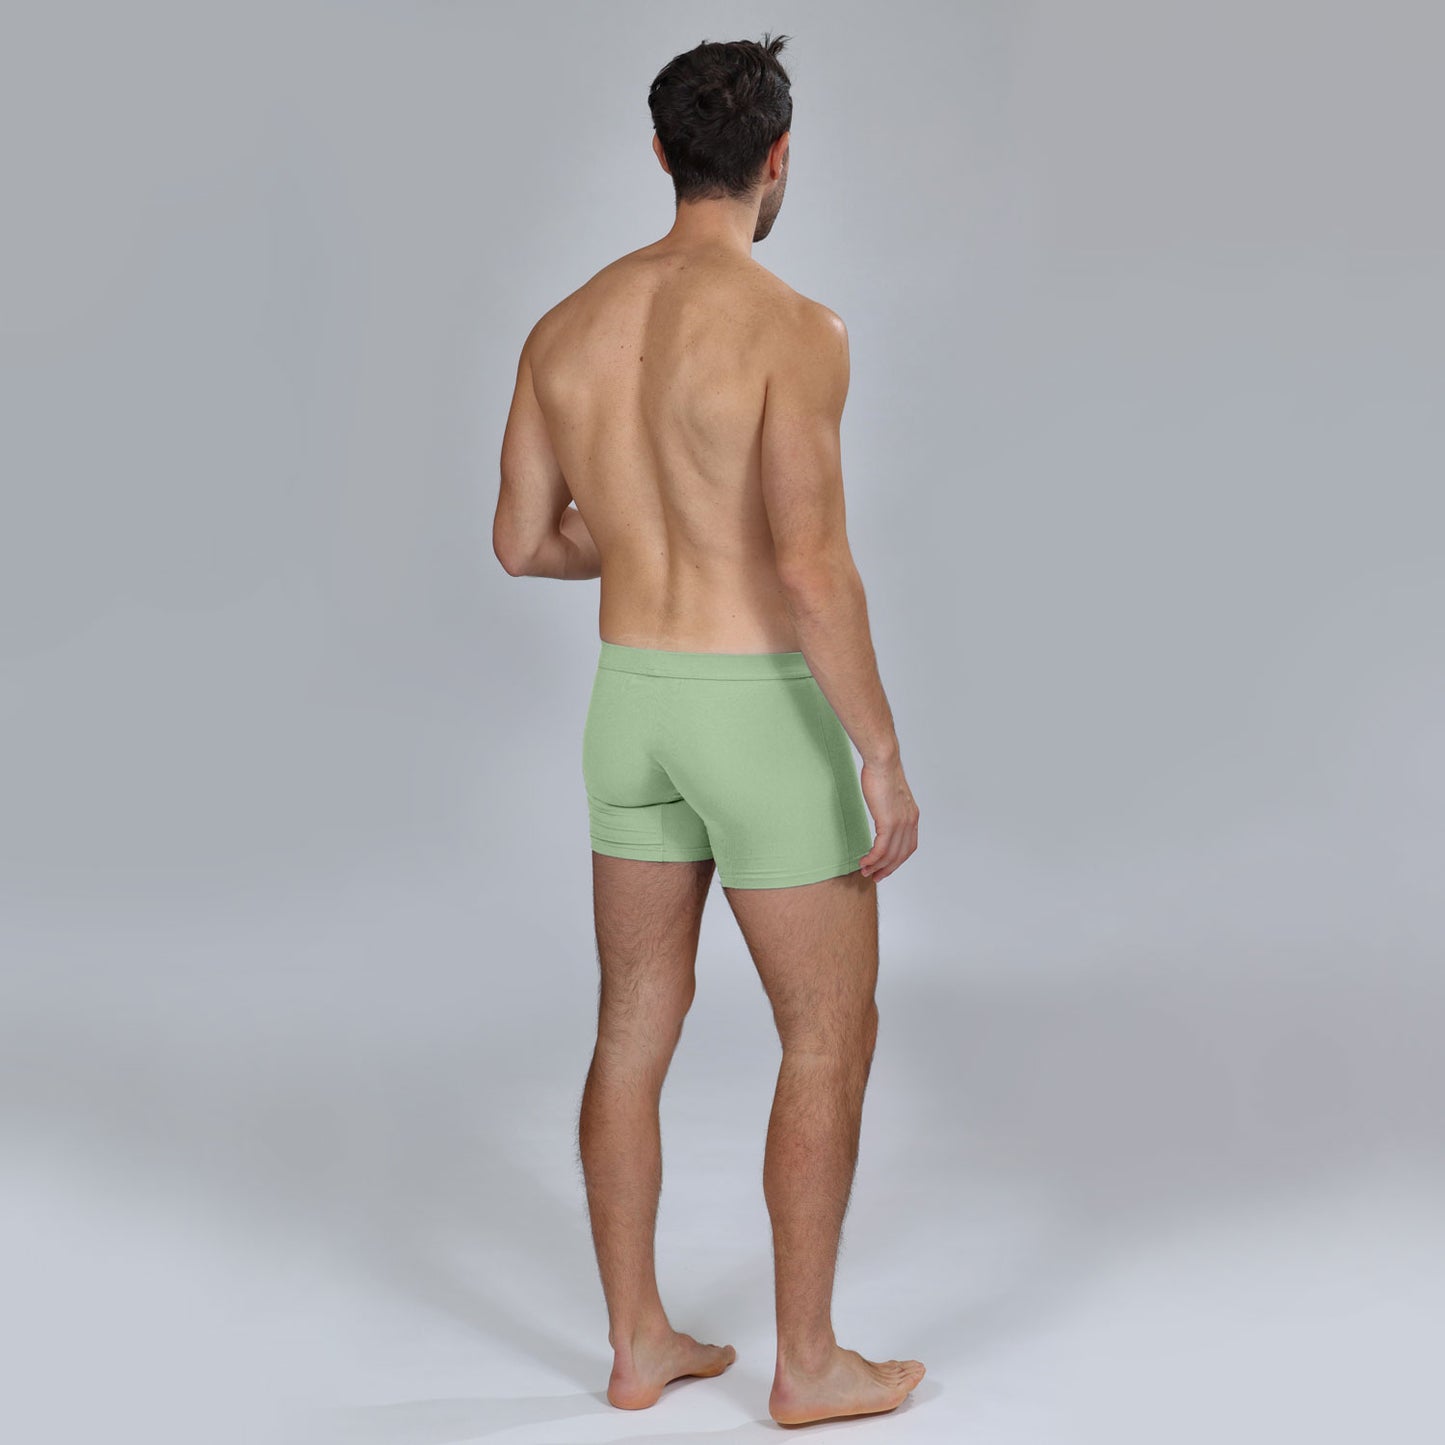 The Limited Edition Mint Green Boxer Brief for men in the USA and Canada